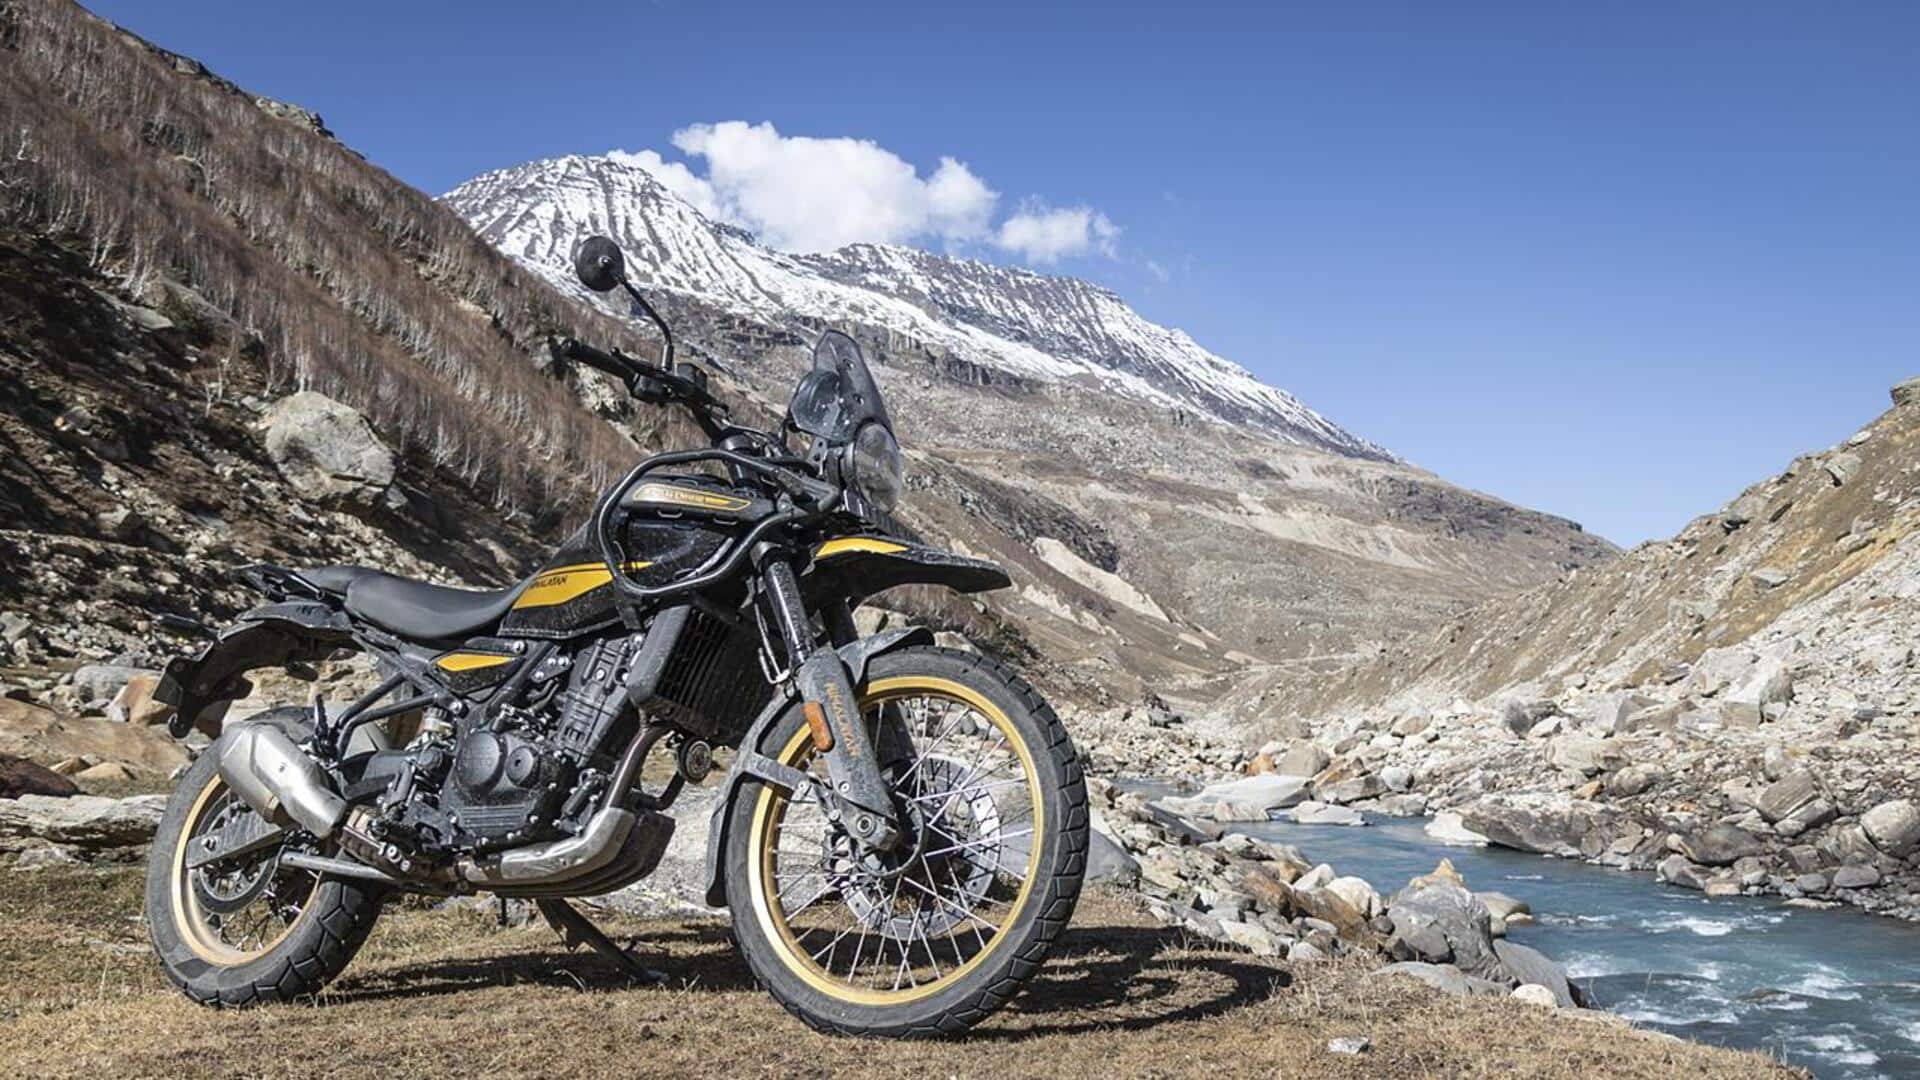 Royal Enfield Himalayan 450 becomes costlier: Check new prices